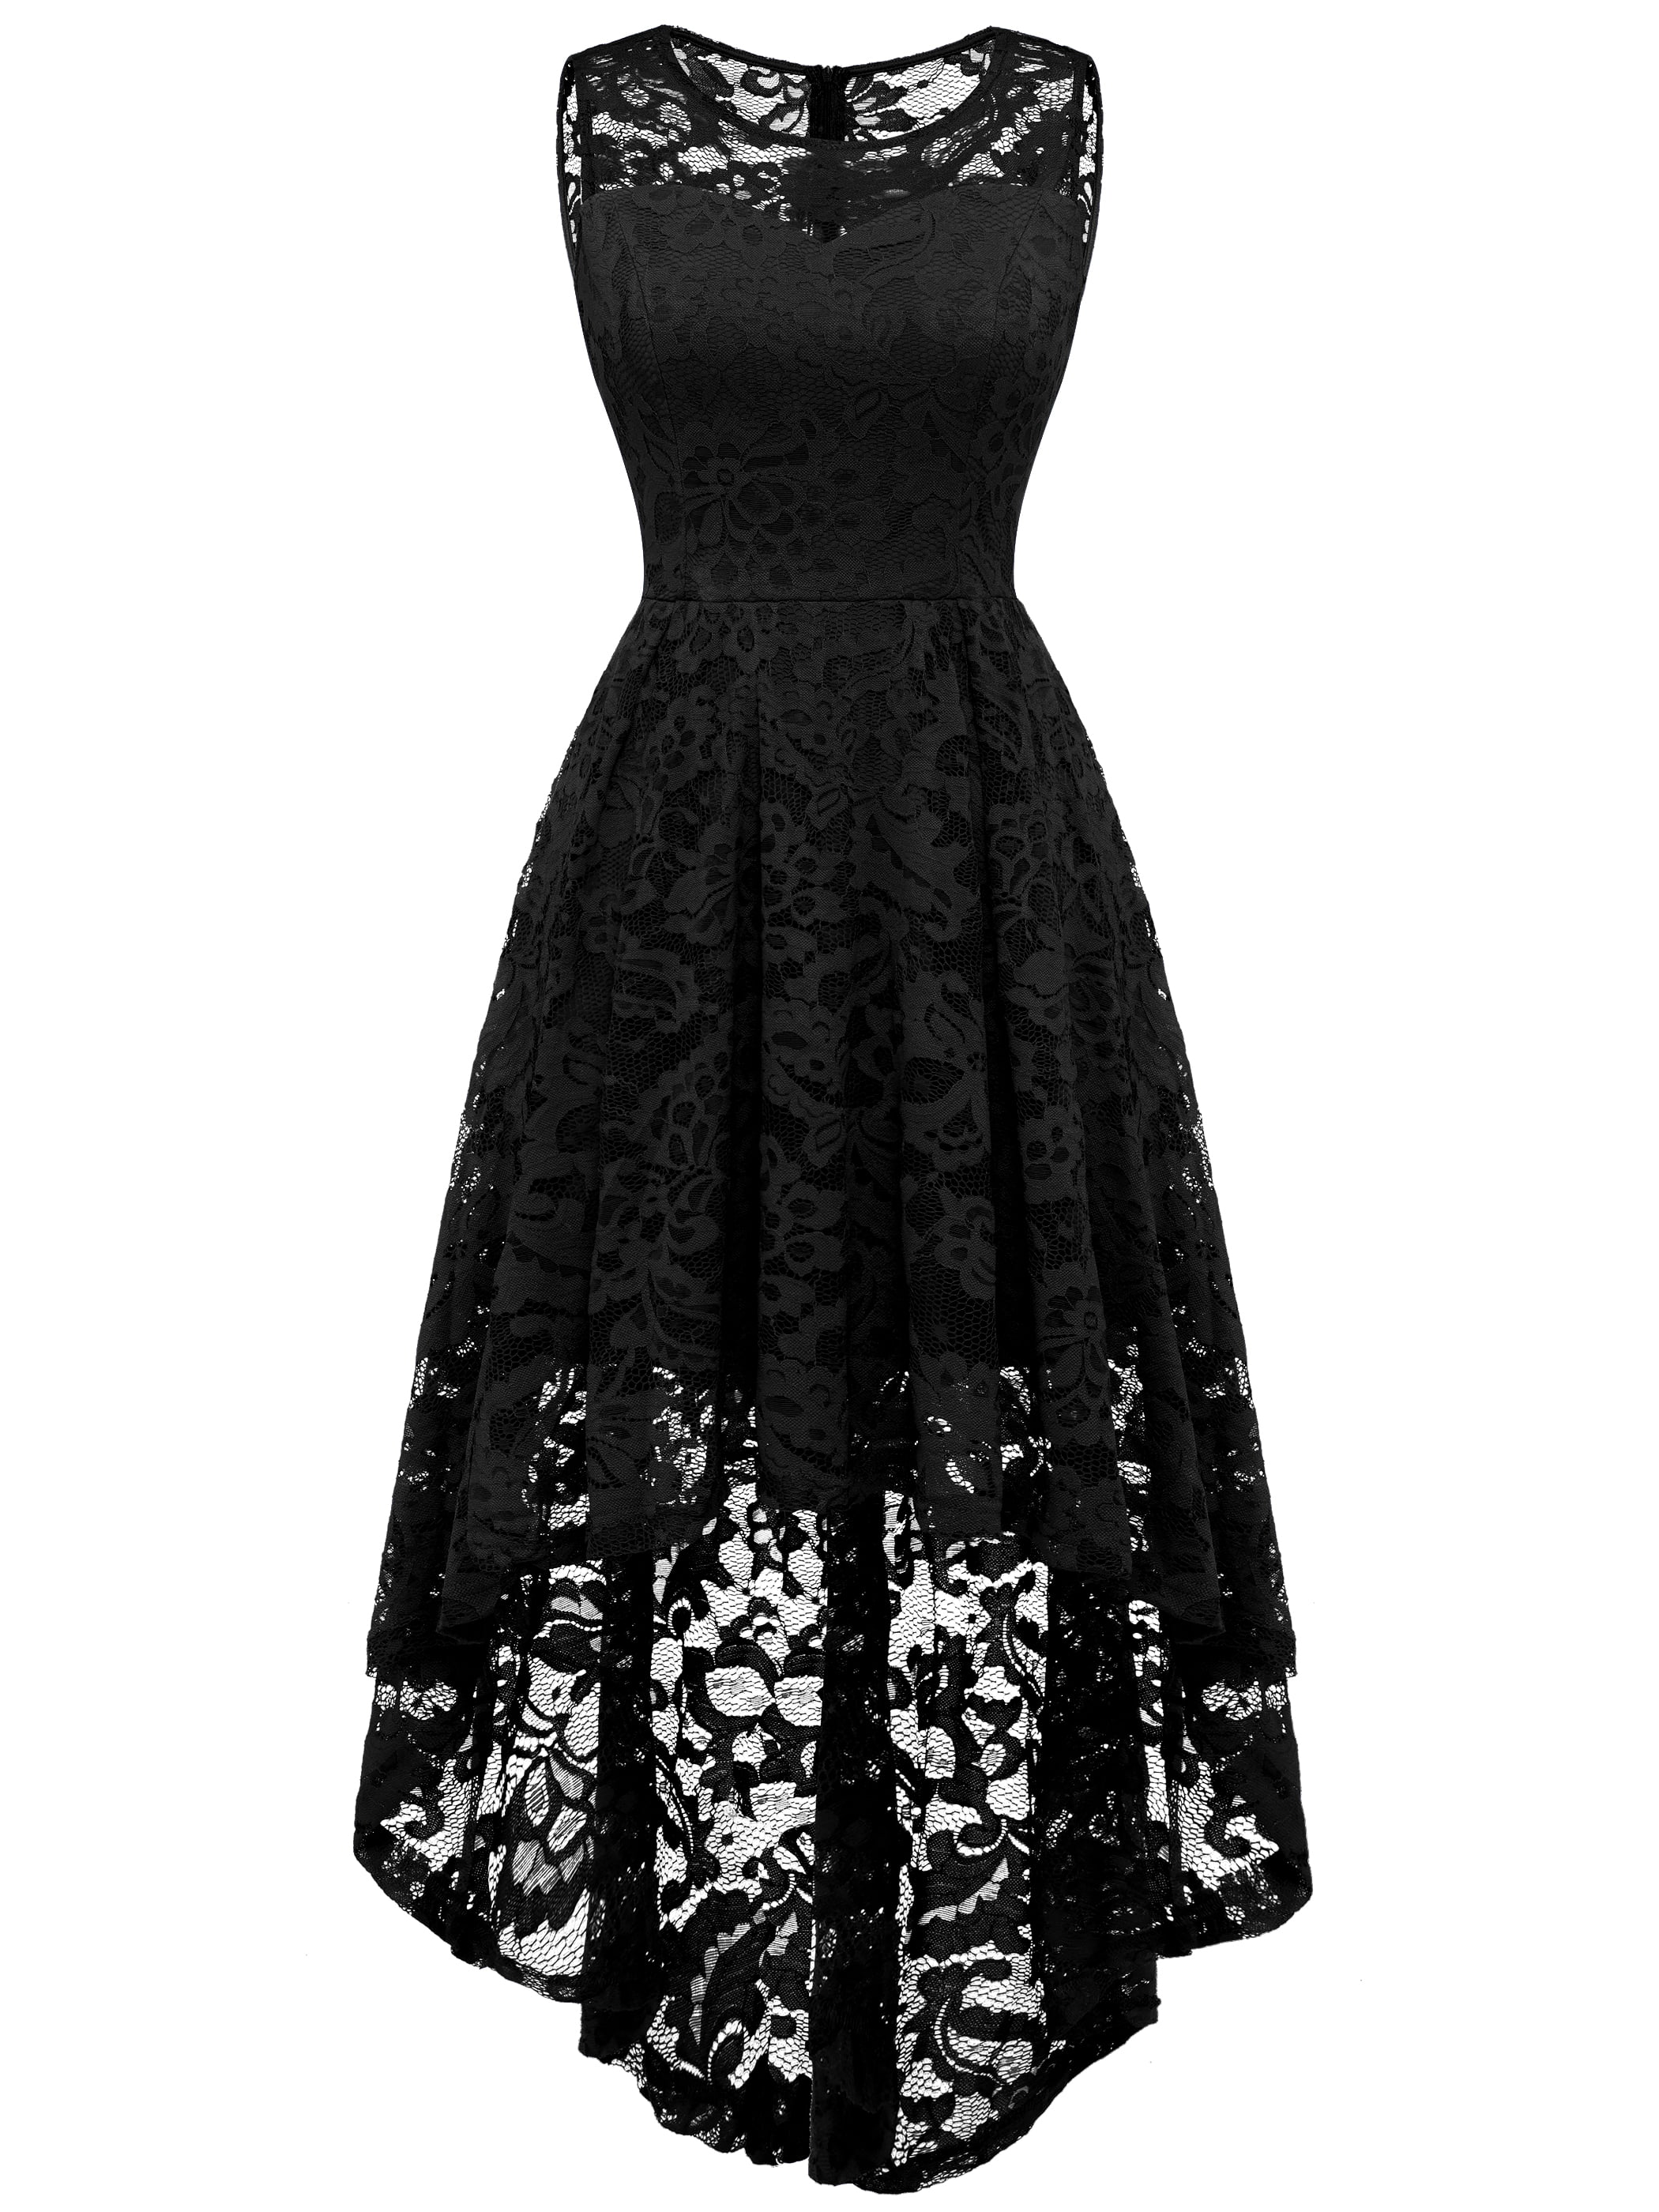 MuaDress Womens Vintage Floral Lace Sleeveless Hi-Lo Cocktail Formal Swing Dress